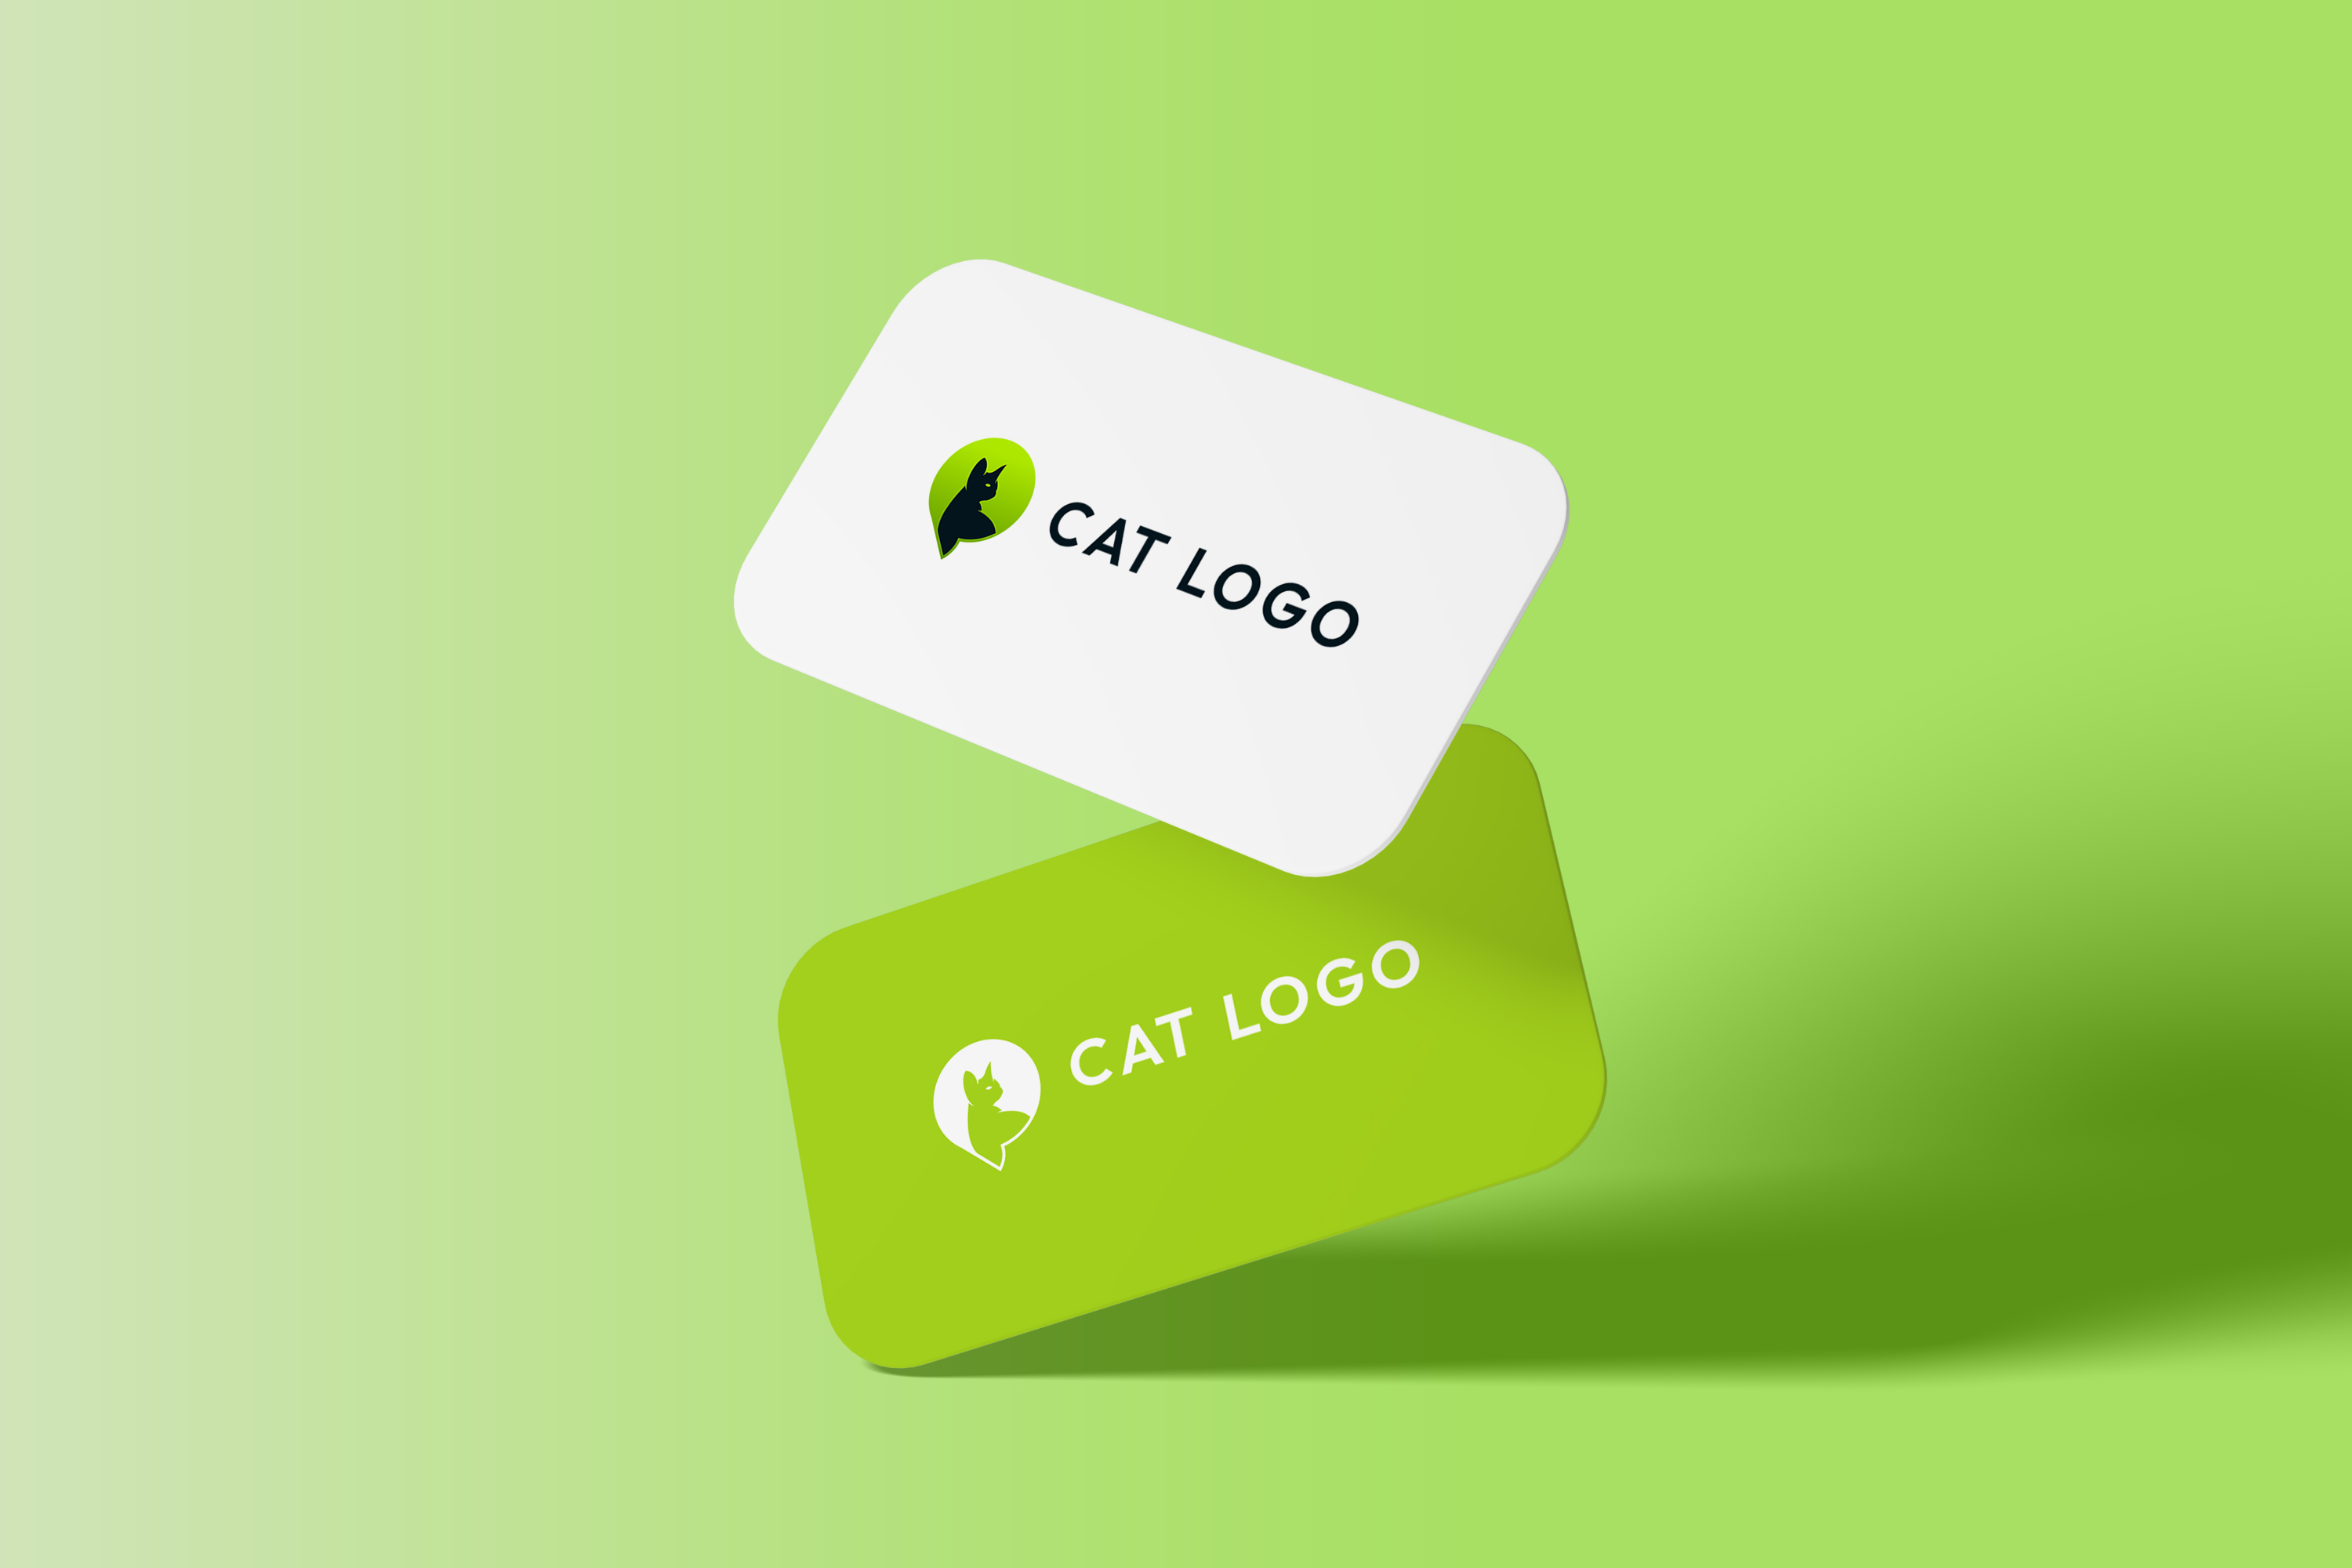 Green business card with a cat logo on it.